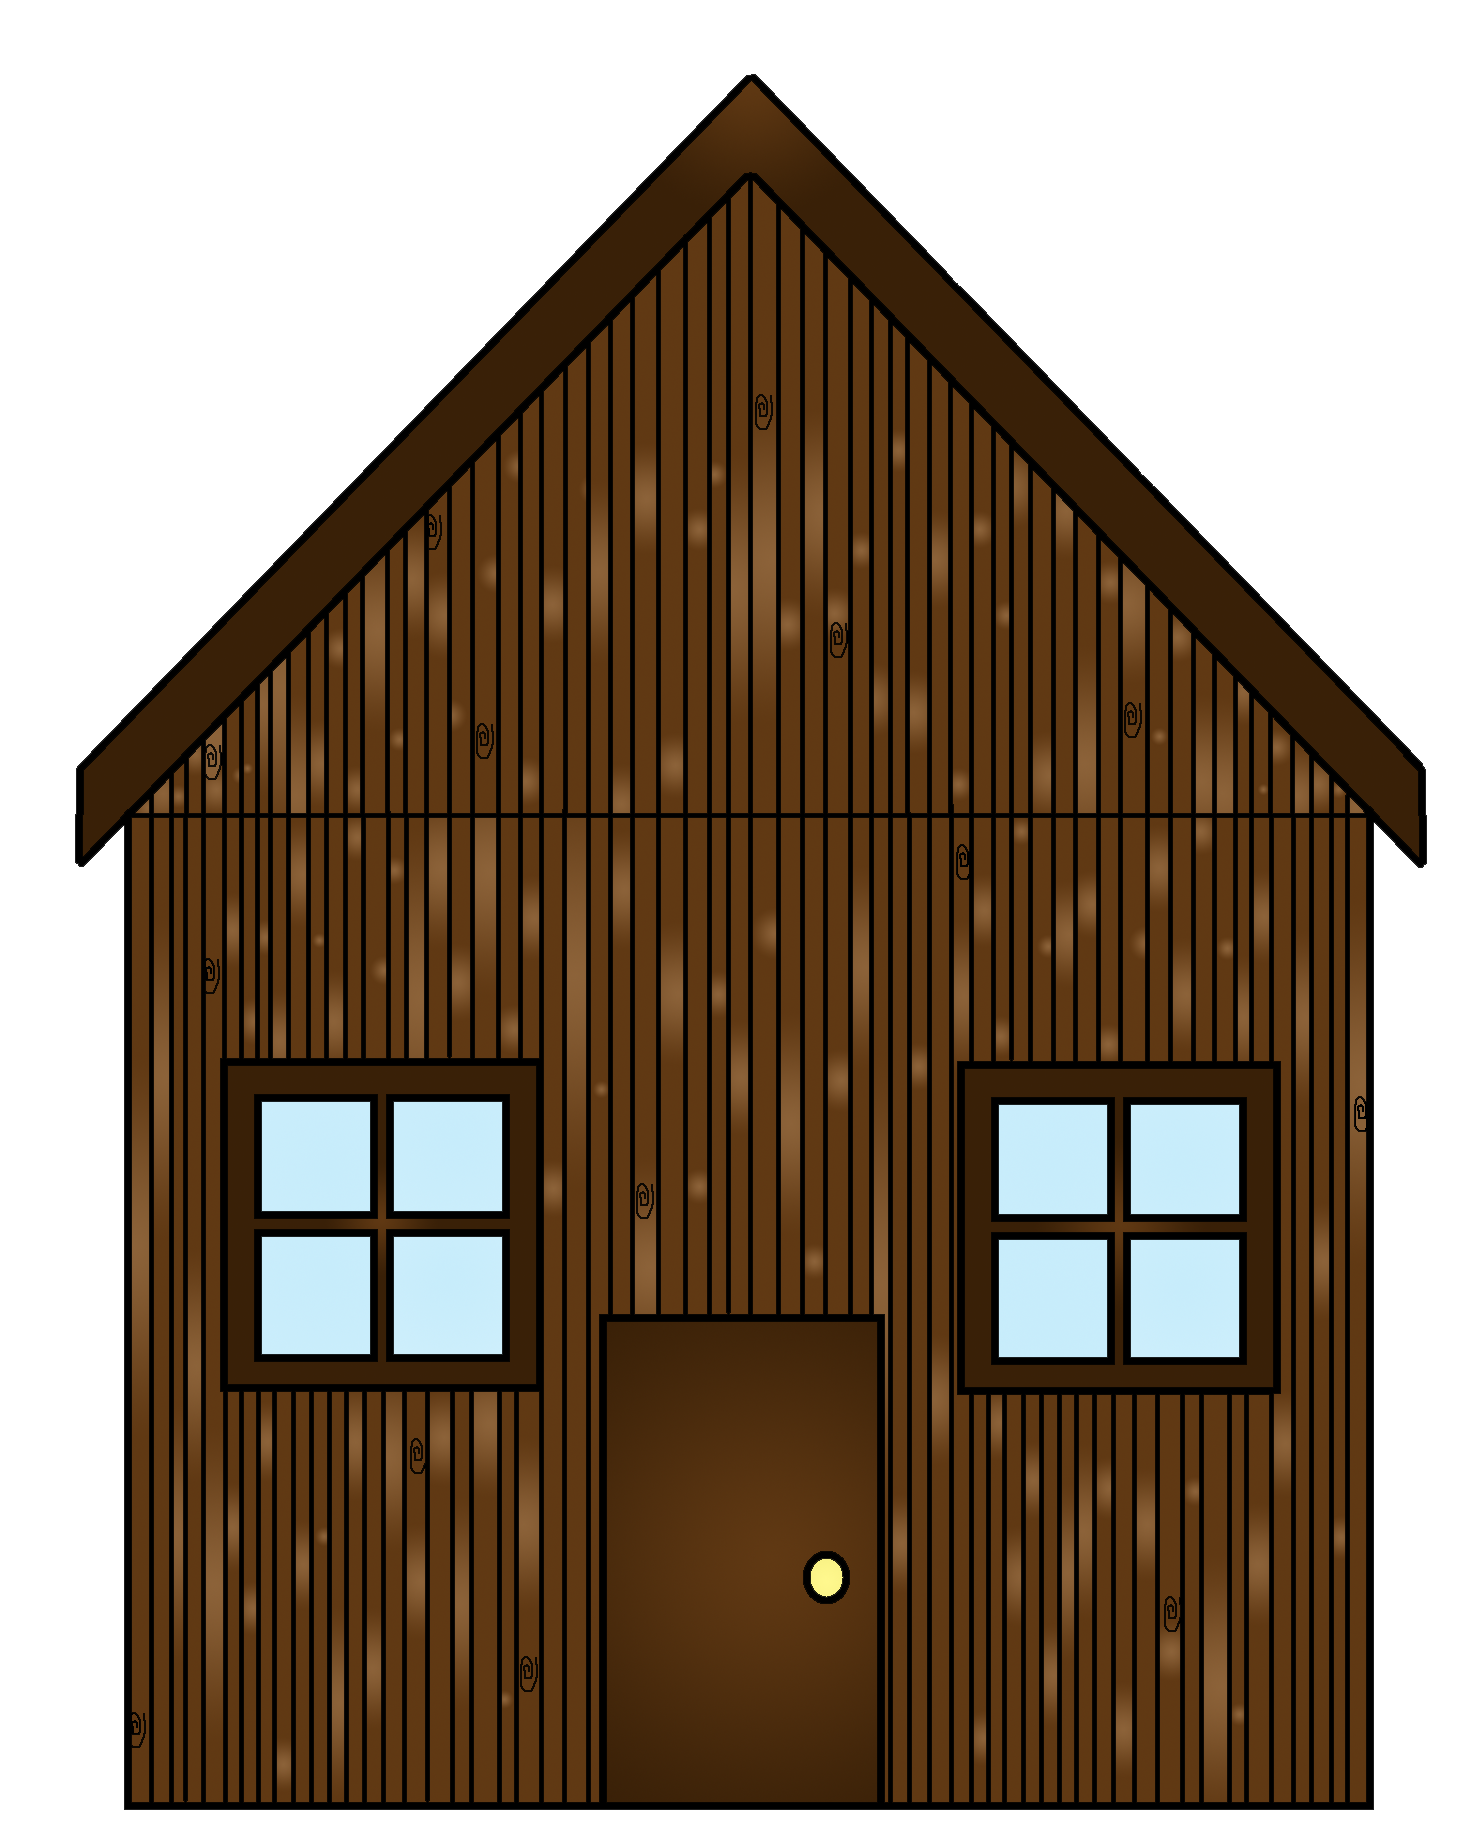 houses clipart small